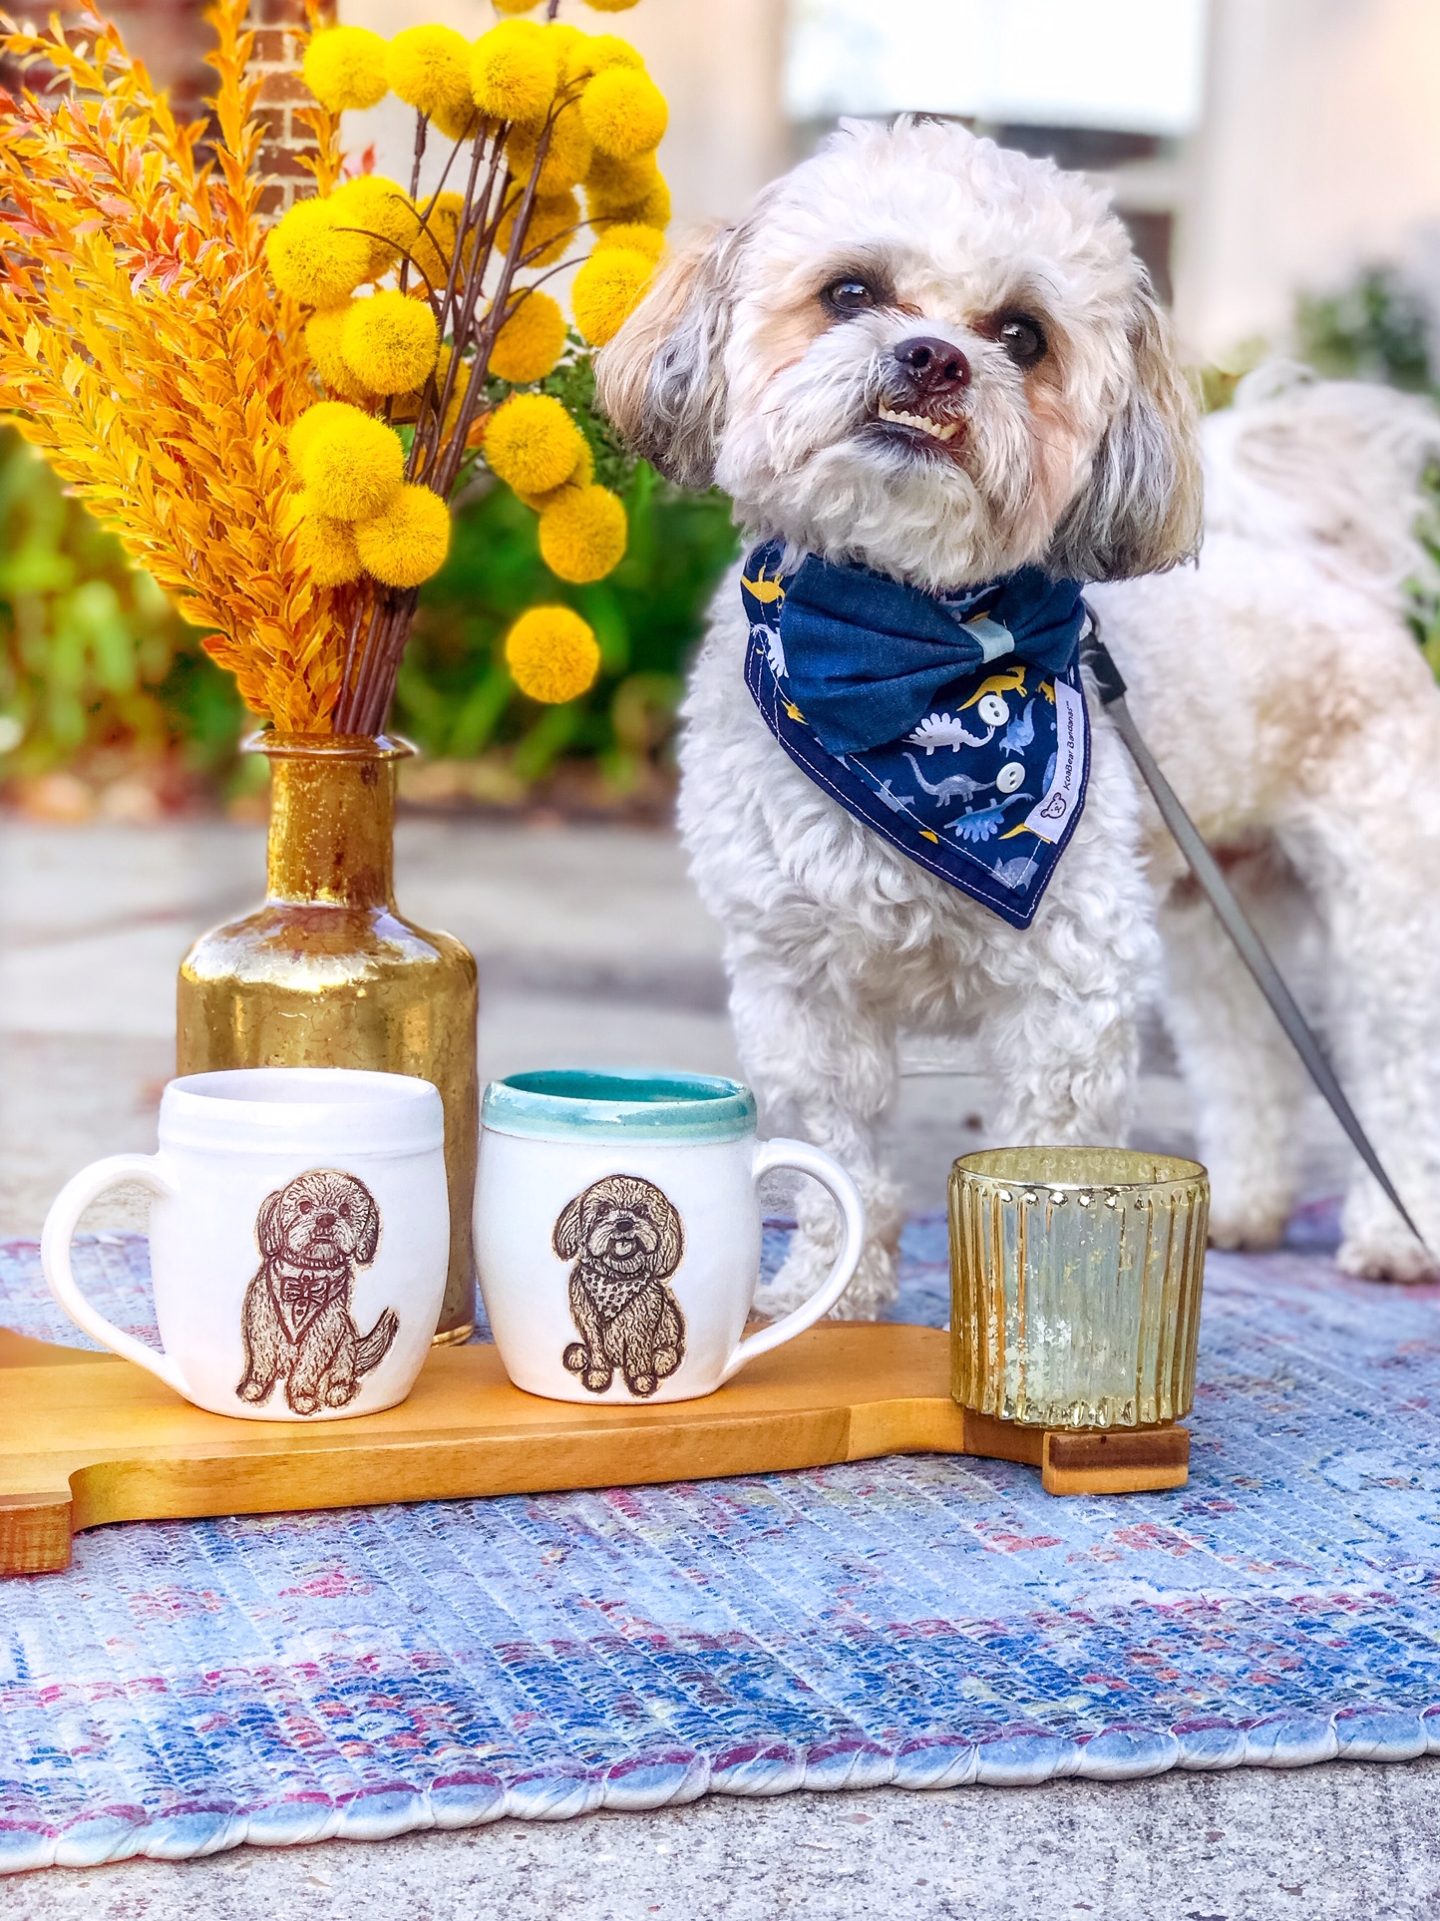 Pet Portrait Mugs by Amanda Proctor Ceramics: A Pawfect Gift for the Pet Obsessed